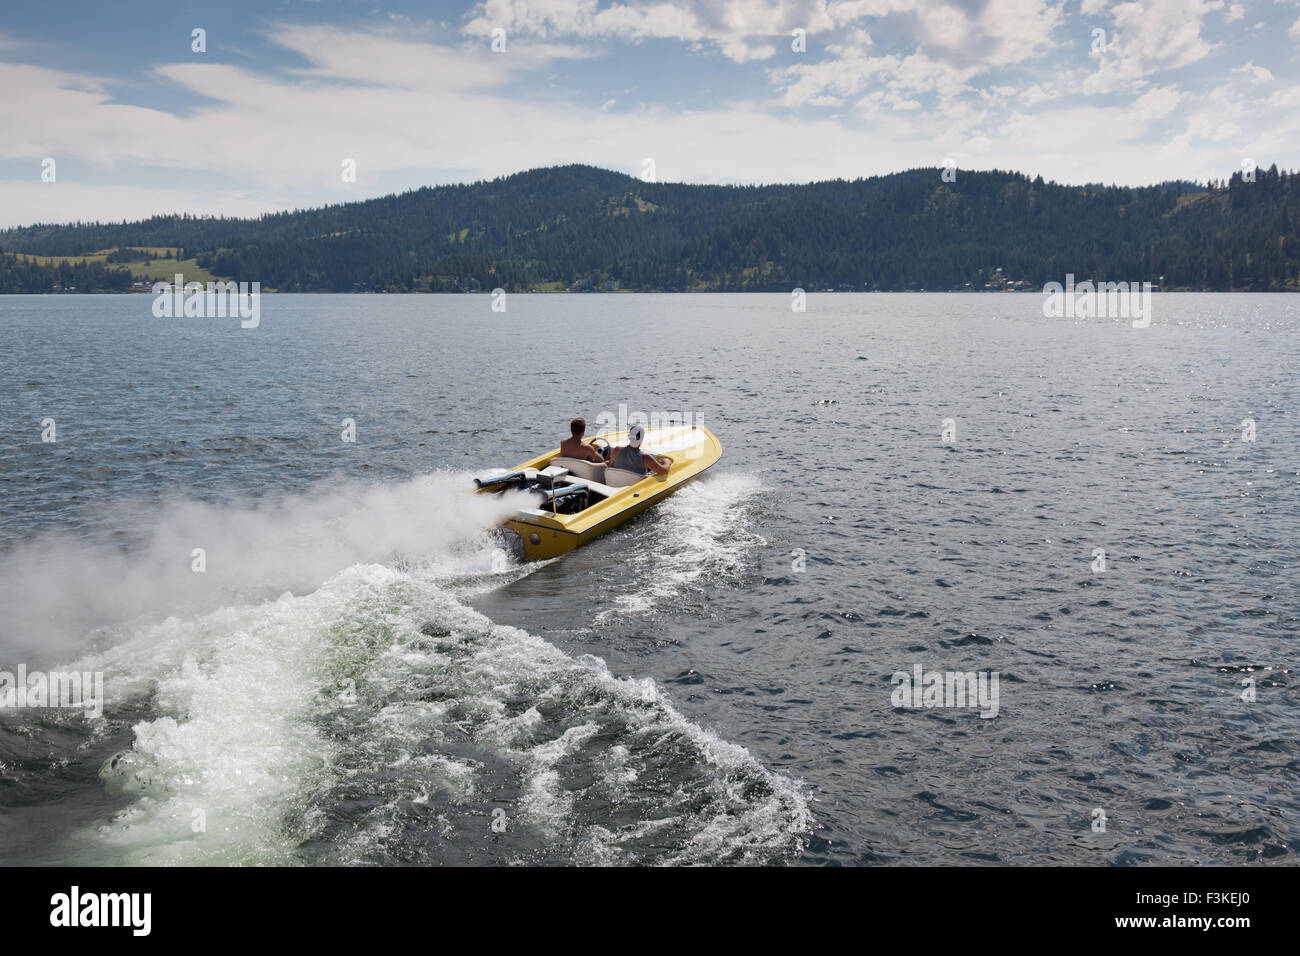 Two men in a yellow speedboat heading out into a lake on a sunny summer day. Stock Photo